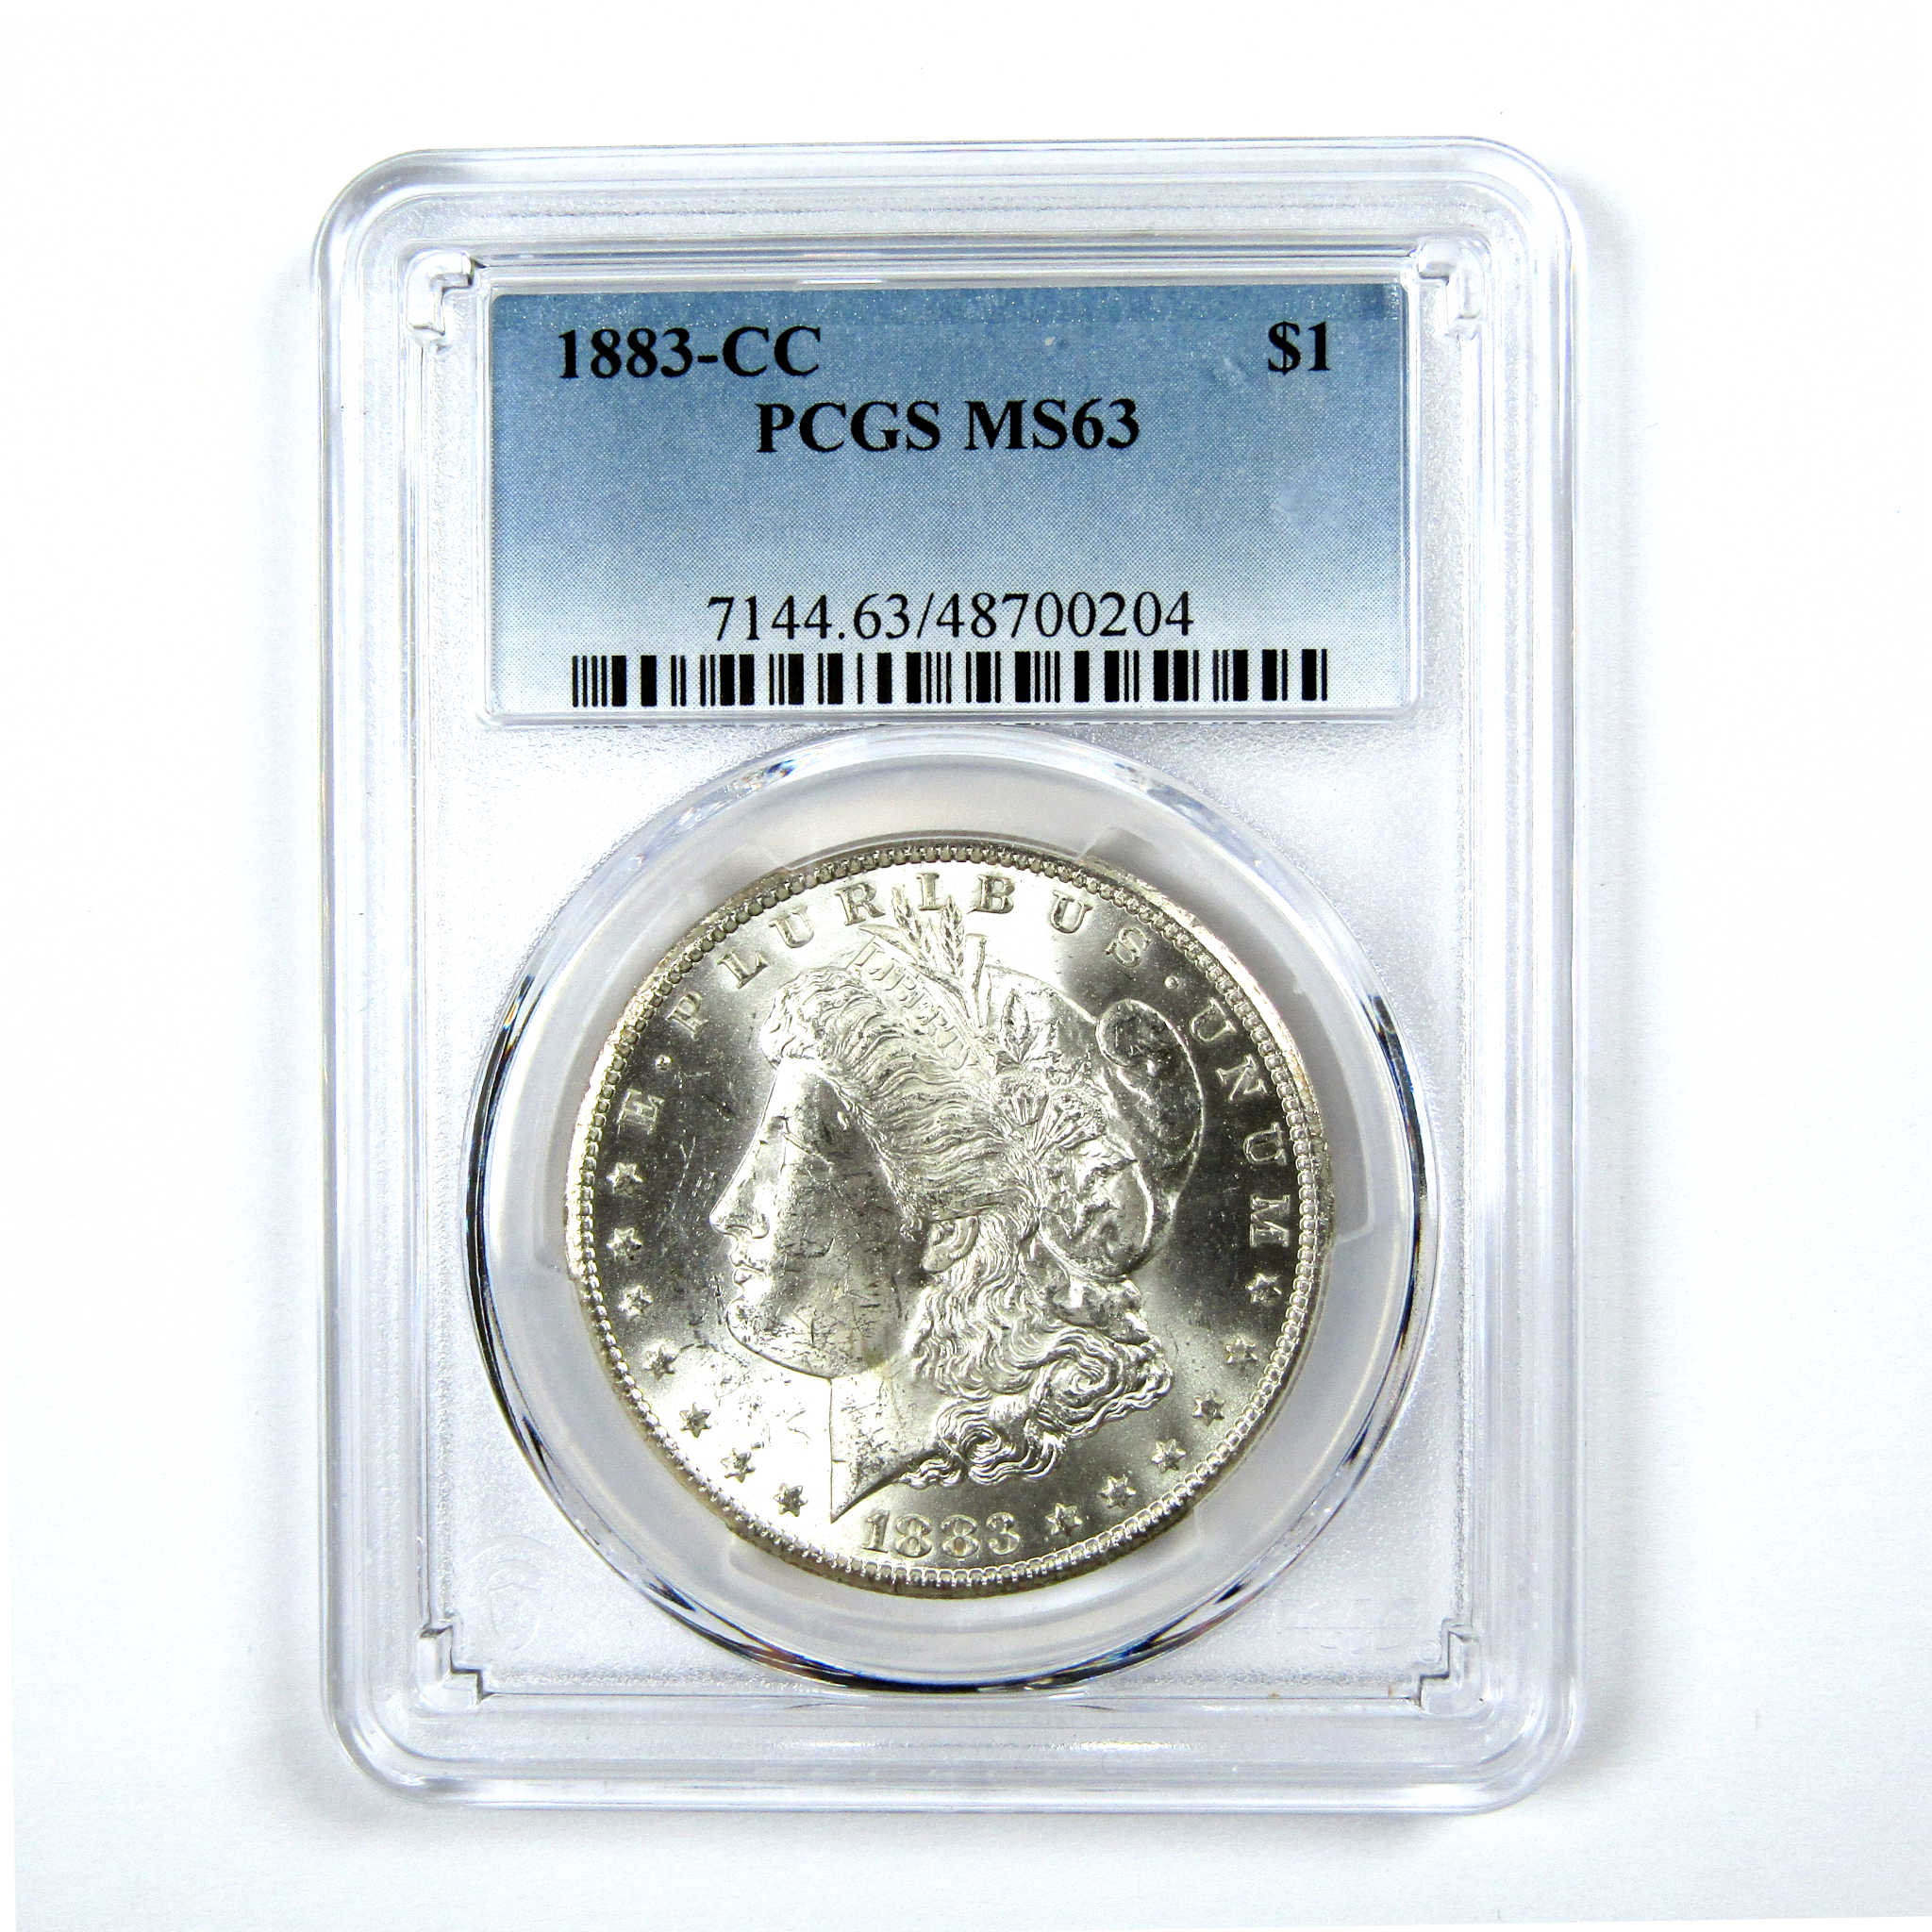 1883 CC Morgan Dollar MS 63 PCGS Silver $1 Uncirculated SKU:I13919 - Morgan coin - Morgan silver dollar - Morgan silver dollar for sale - Profile Coins &amp; Collectibles